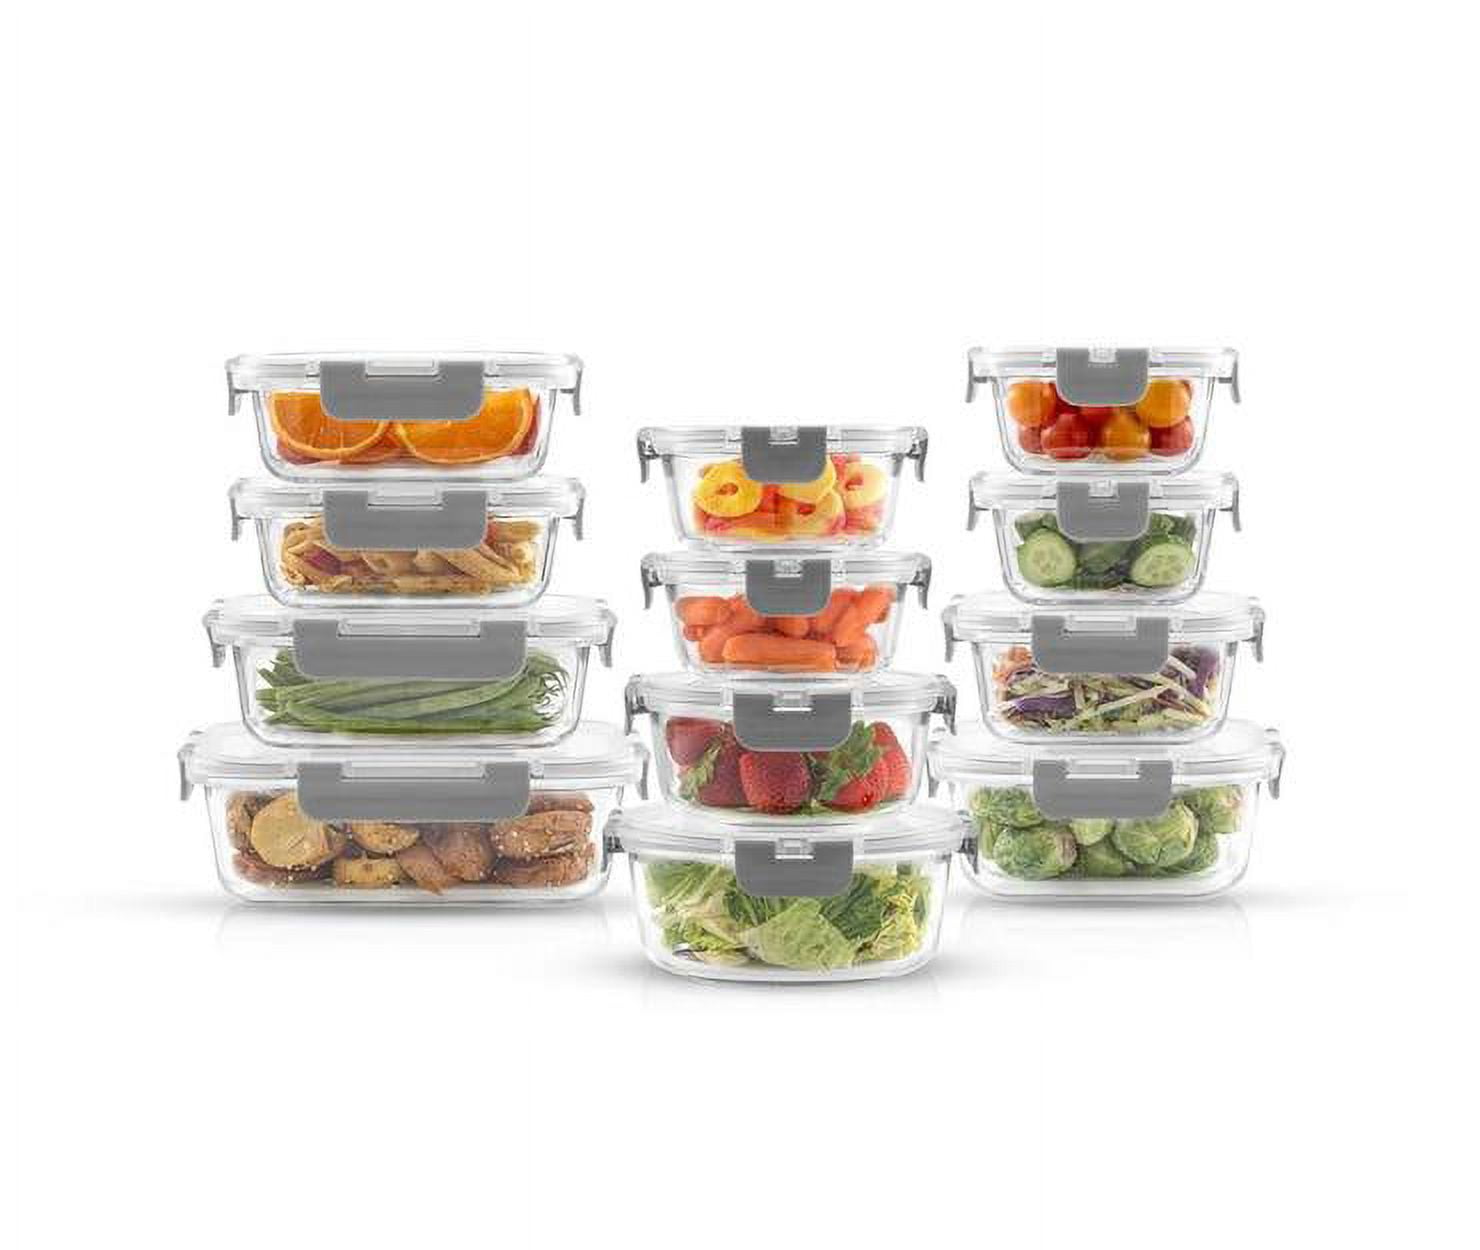 JoyJolt Kitchen Canister Set. 6 Glass Jars with Lids (Stainless Steel)  Lids. Airtight Food Storage Containers for Pantry or Counter. Versatile  Pantry